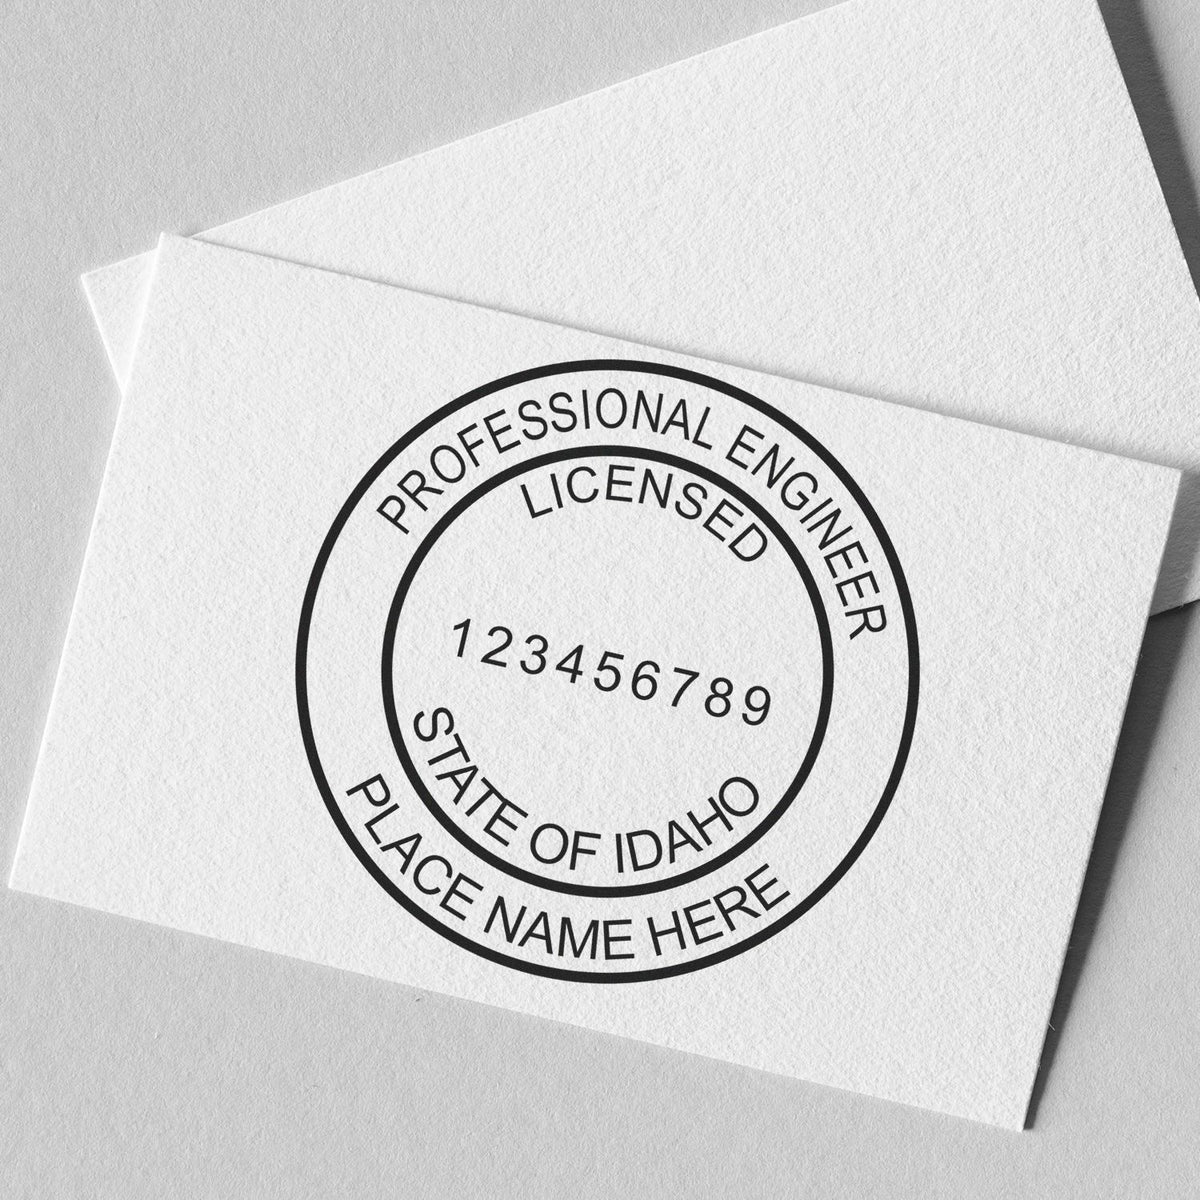 This paper is stamped with a sample imprint of the Idaho Professional Engineer Seal Stamp, signifying its quality and reliability.